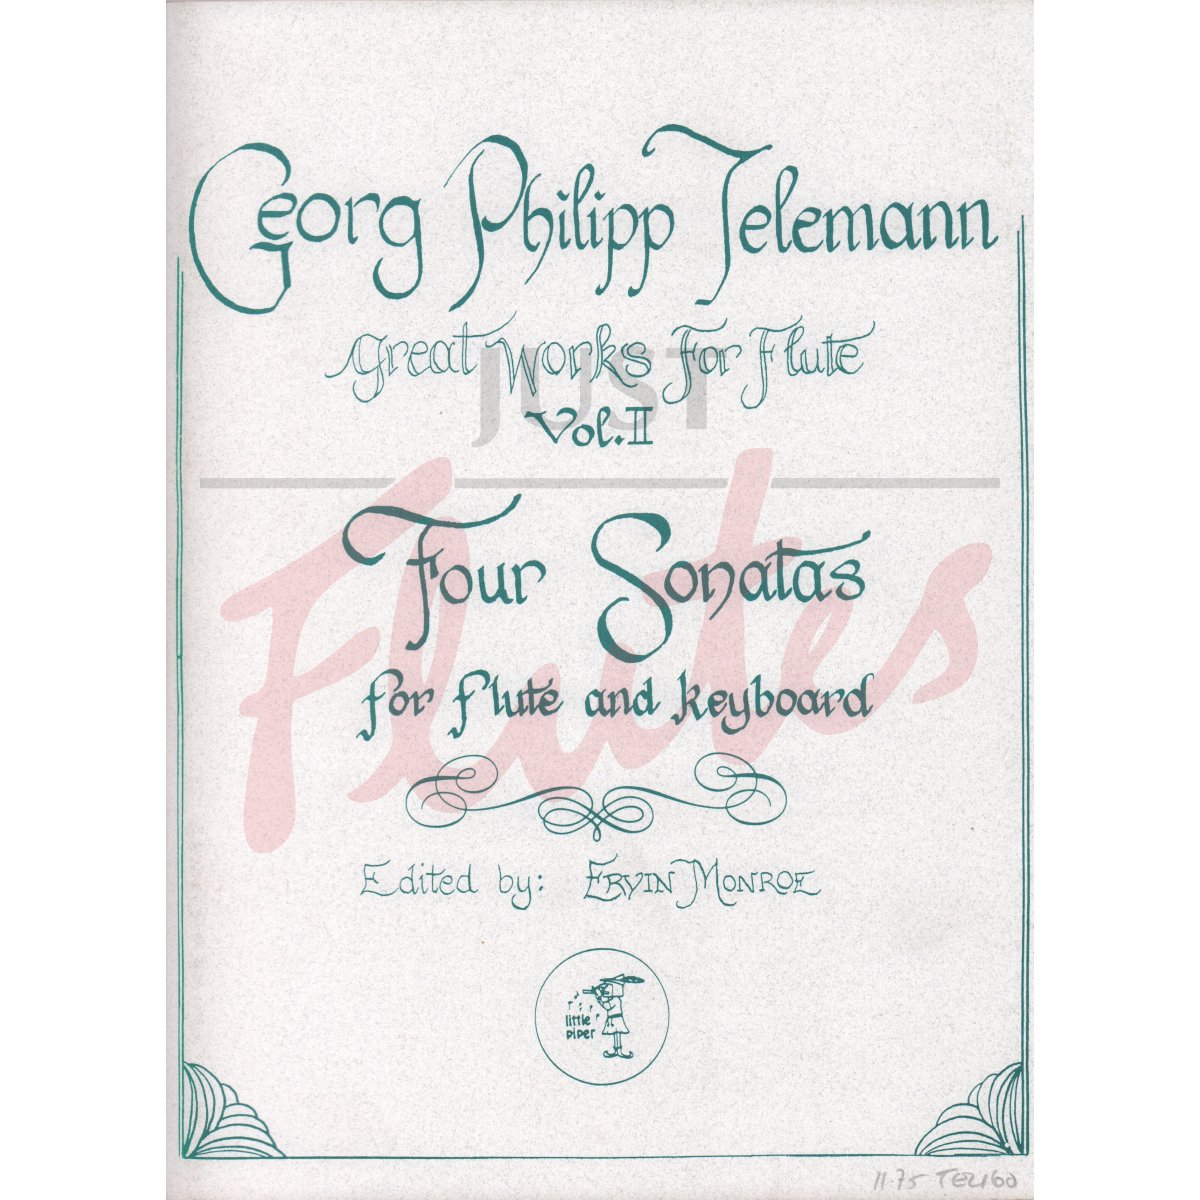 Four Sonatas for Flute and Keyboard